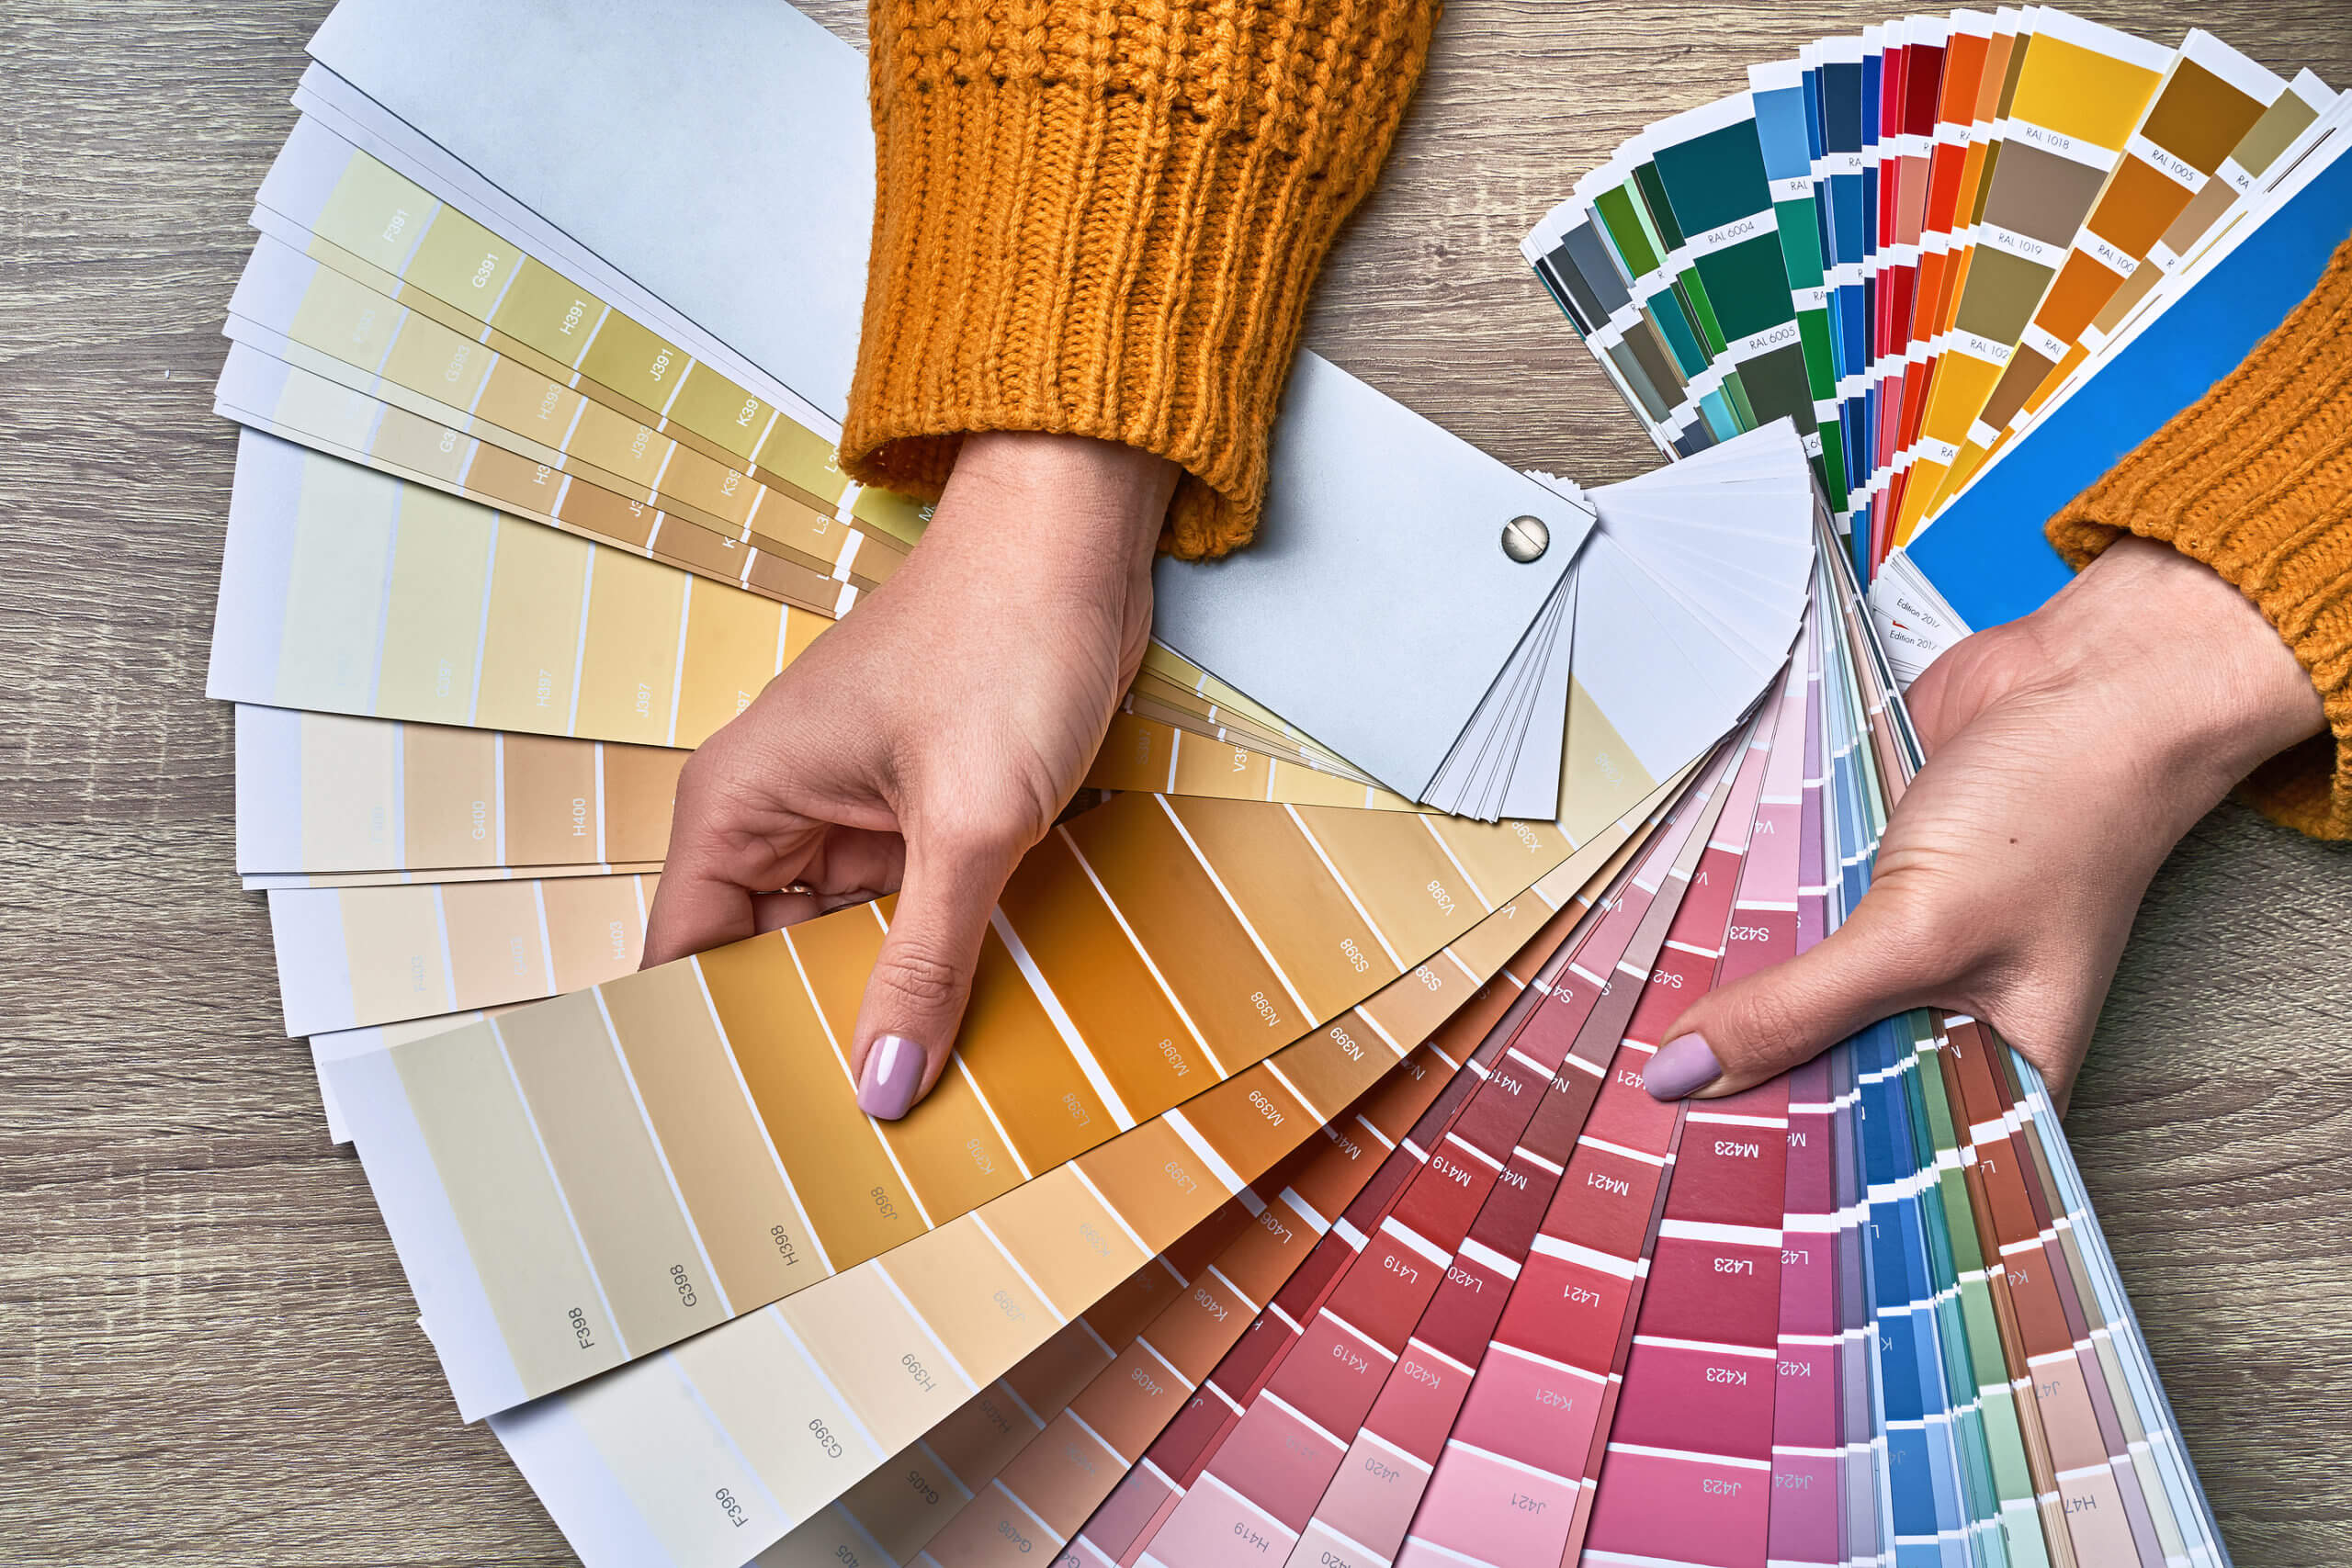 Choosing the Right Paint Colors for Your Home